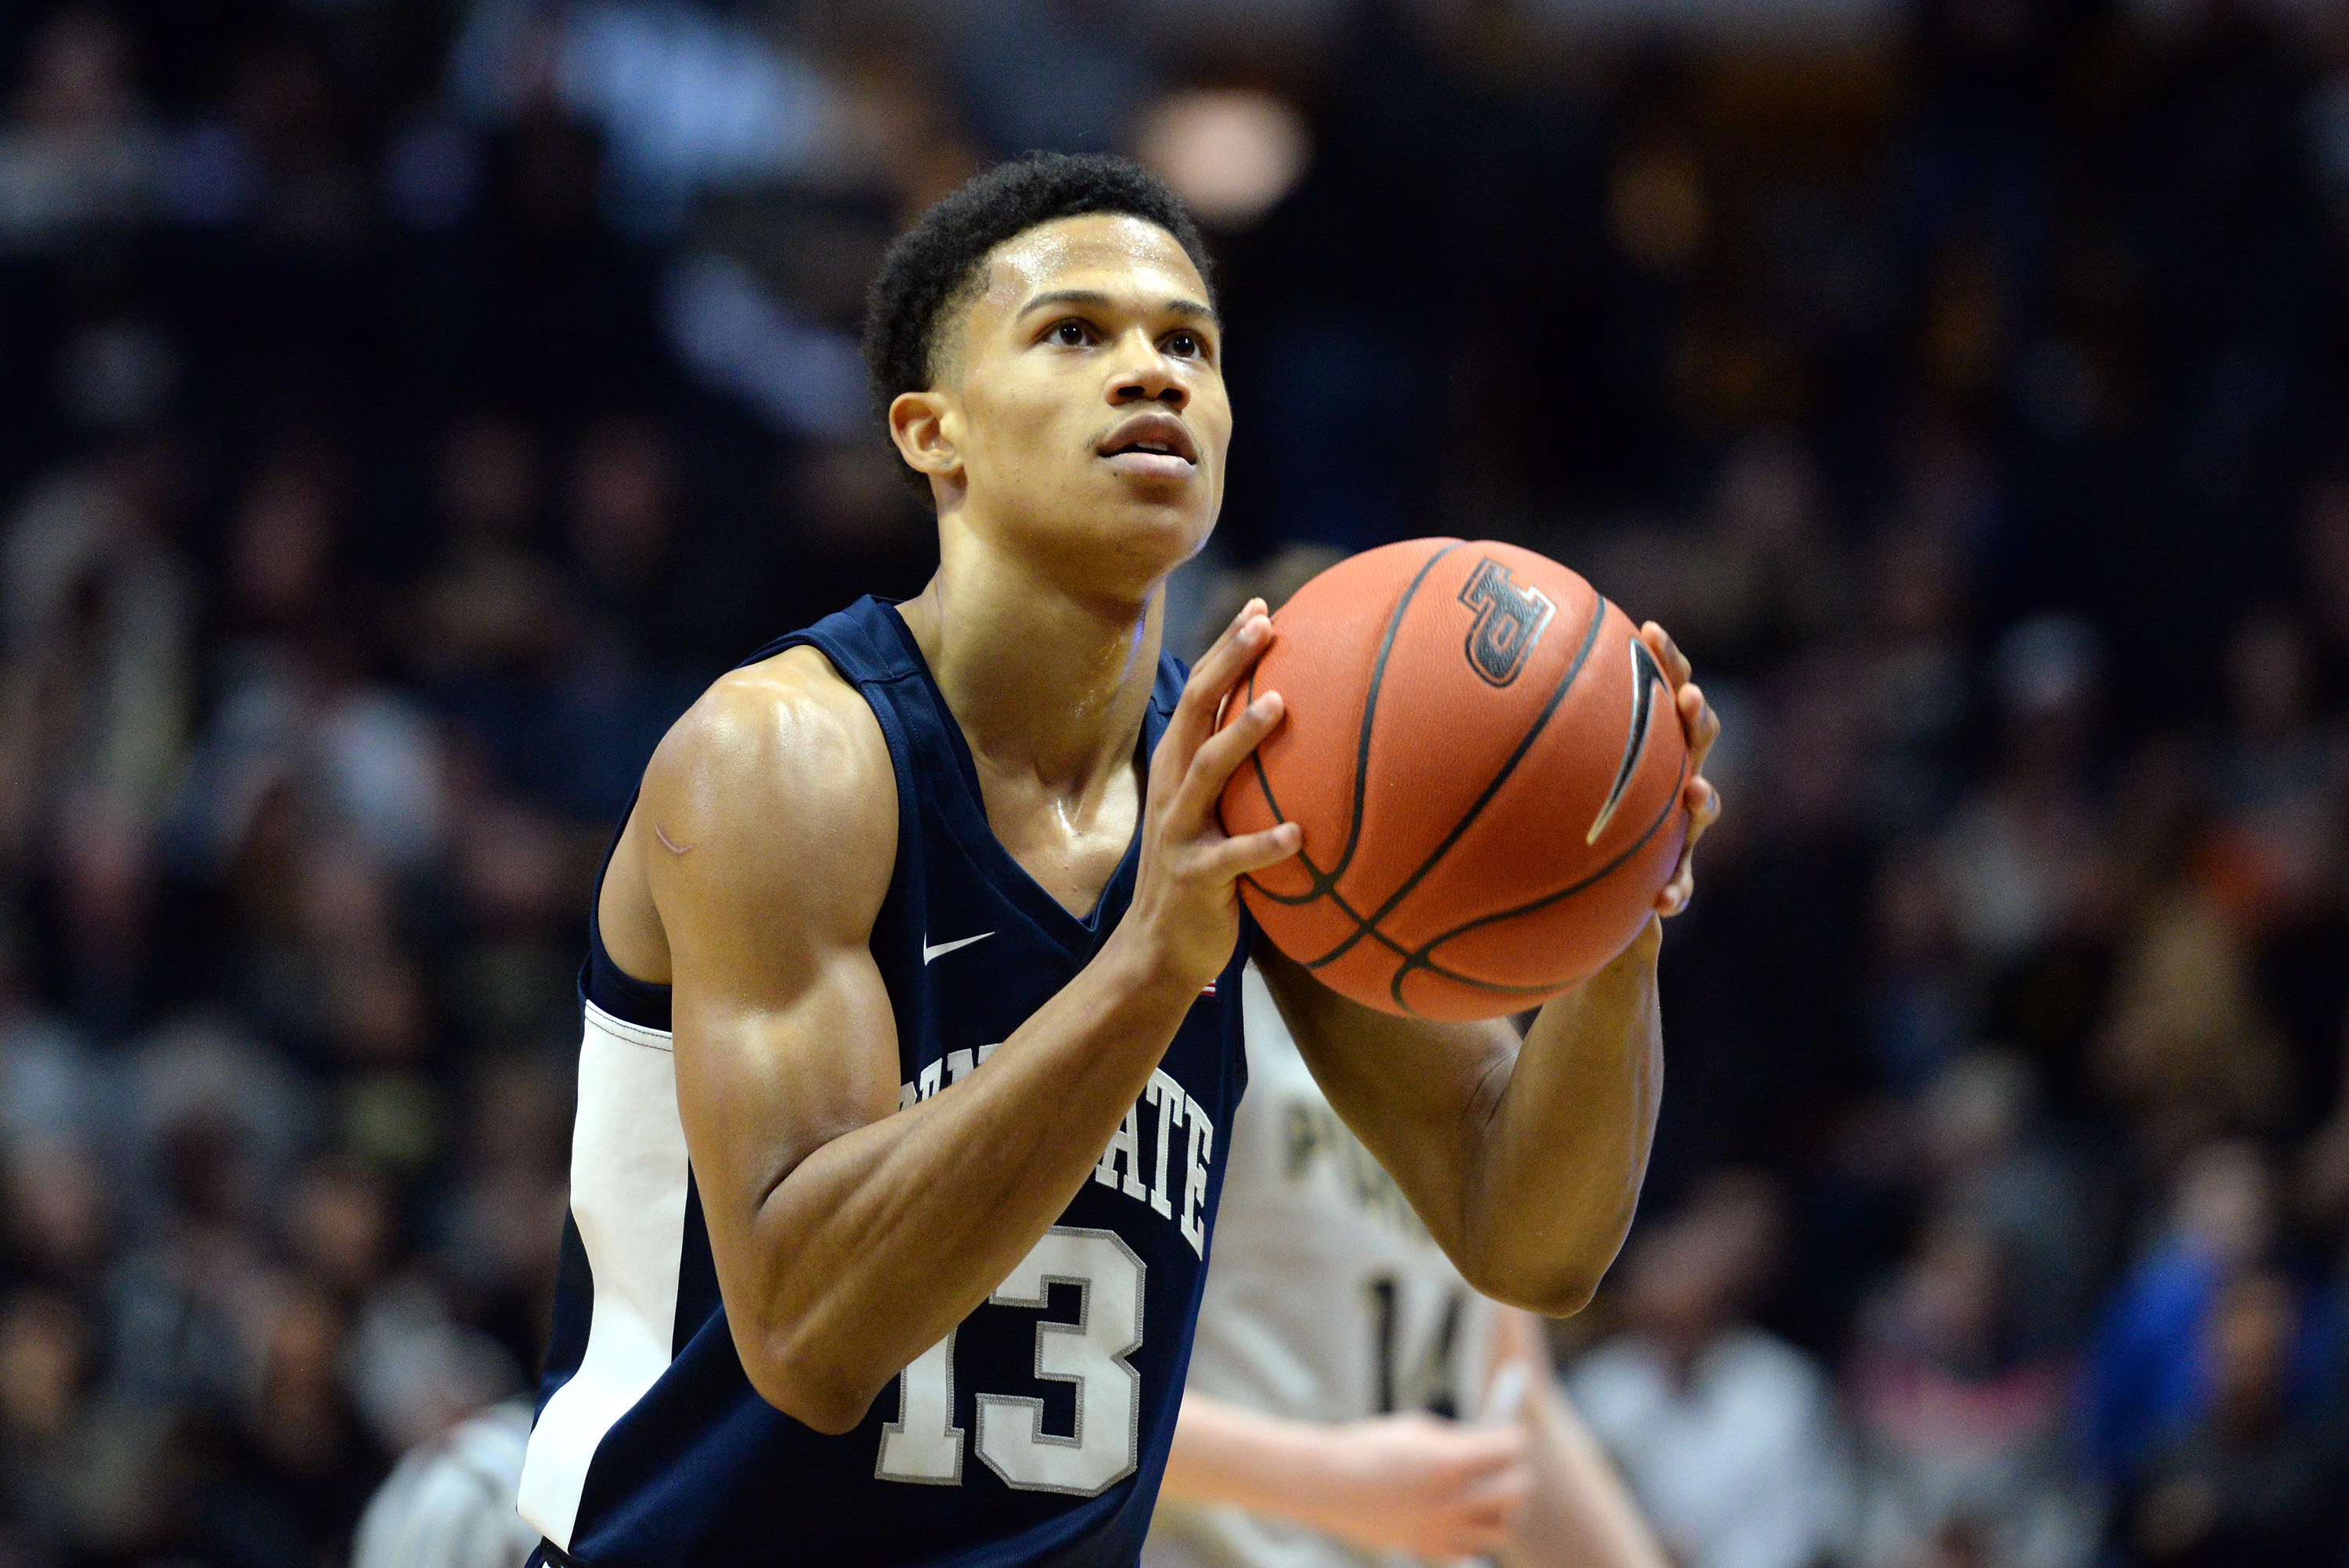 Former Penn State player Rasir Bolton just explained why he left the team in 2019, and it doesn't look good for Patrick Chambers.